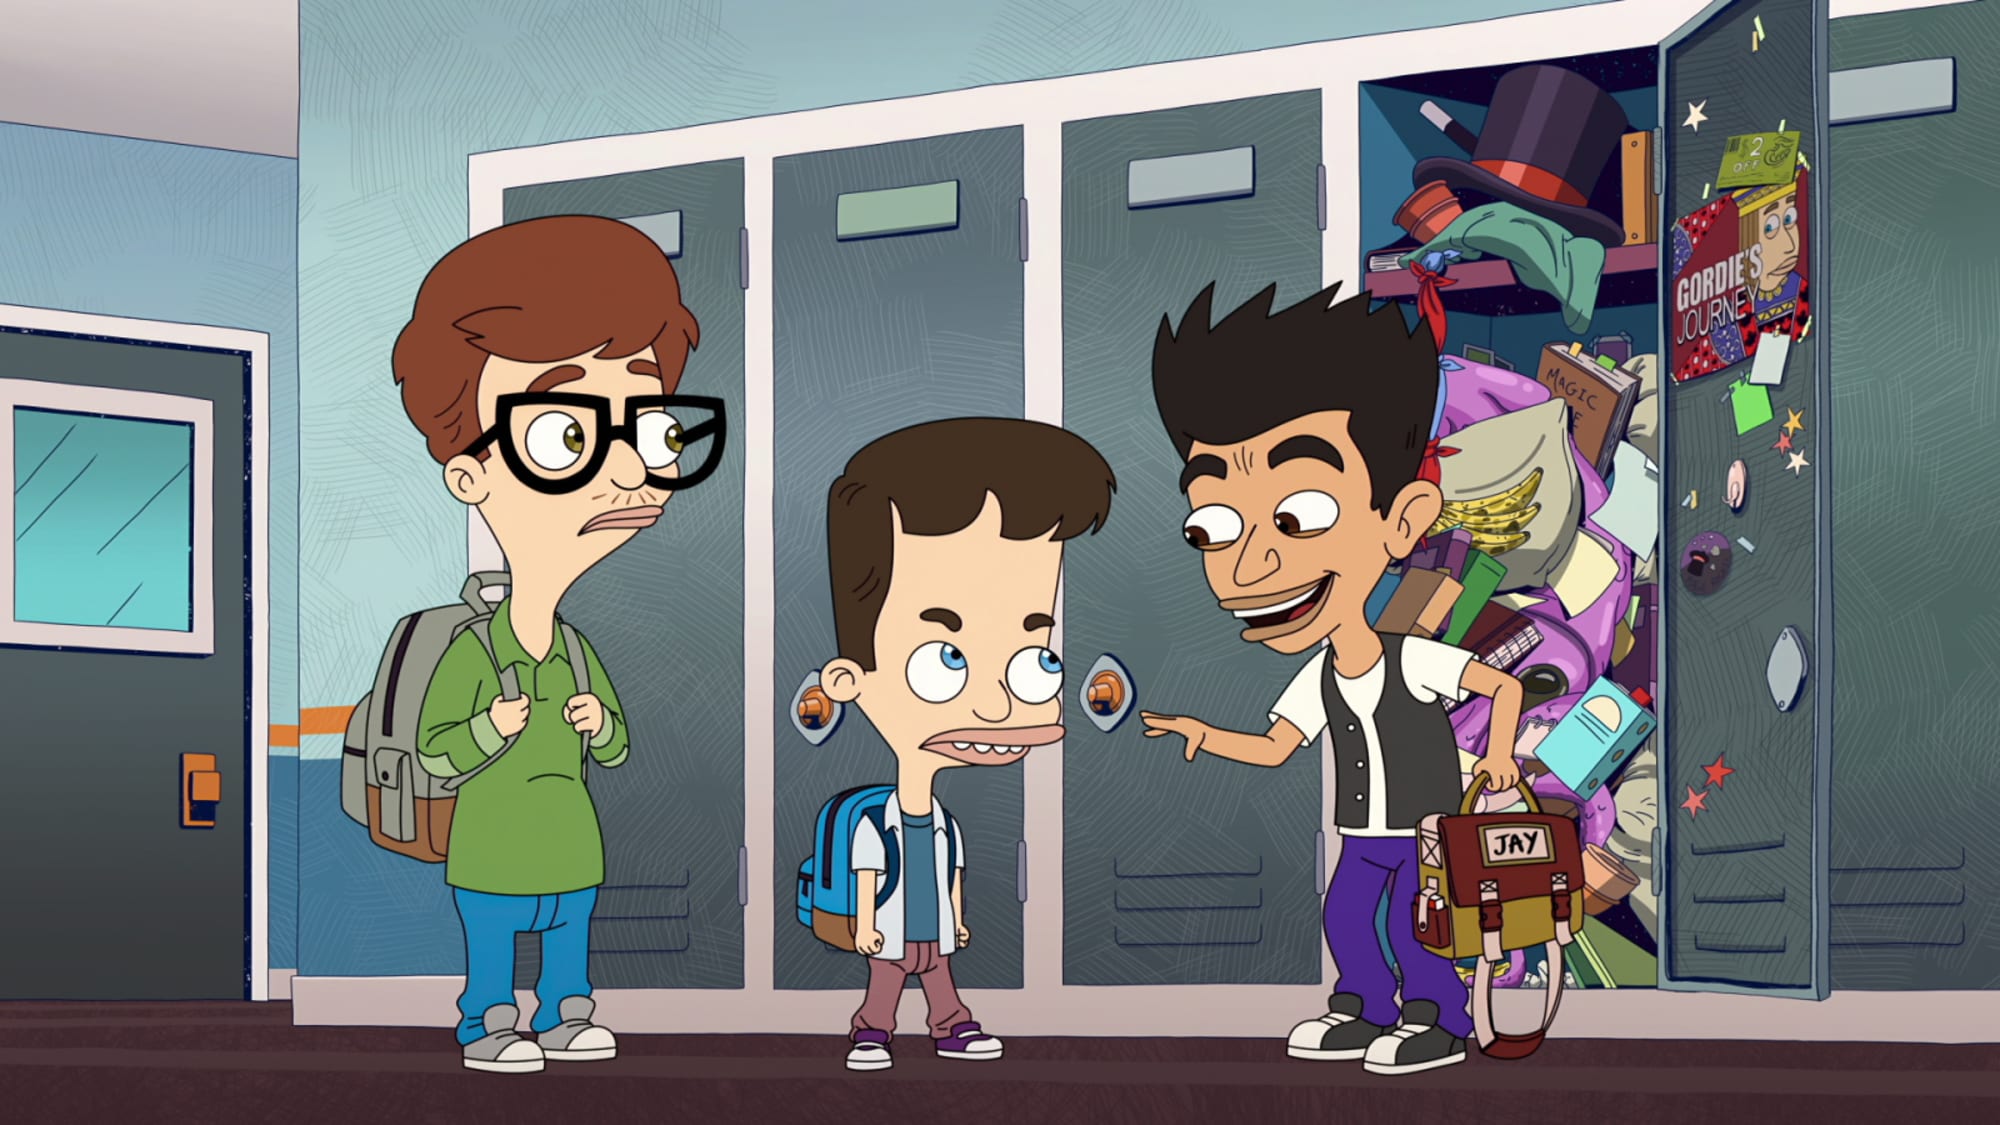 Big Mouth Season 7 Release Date Revealed! Get Ready for More Awkward Puberty Moments 13